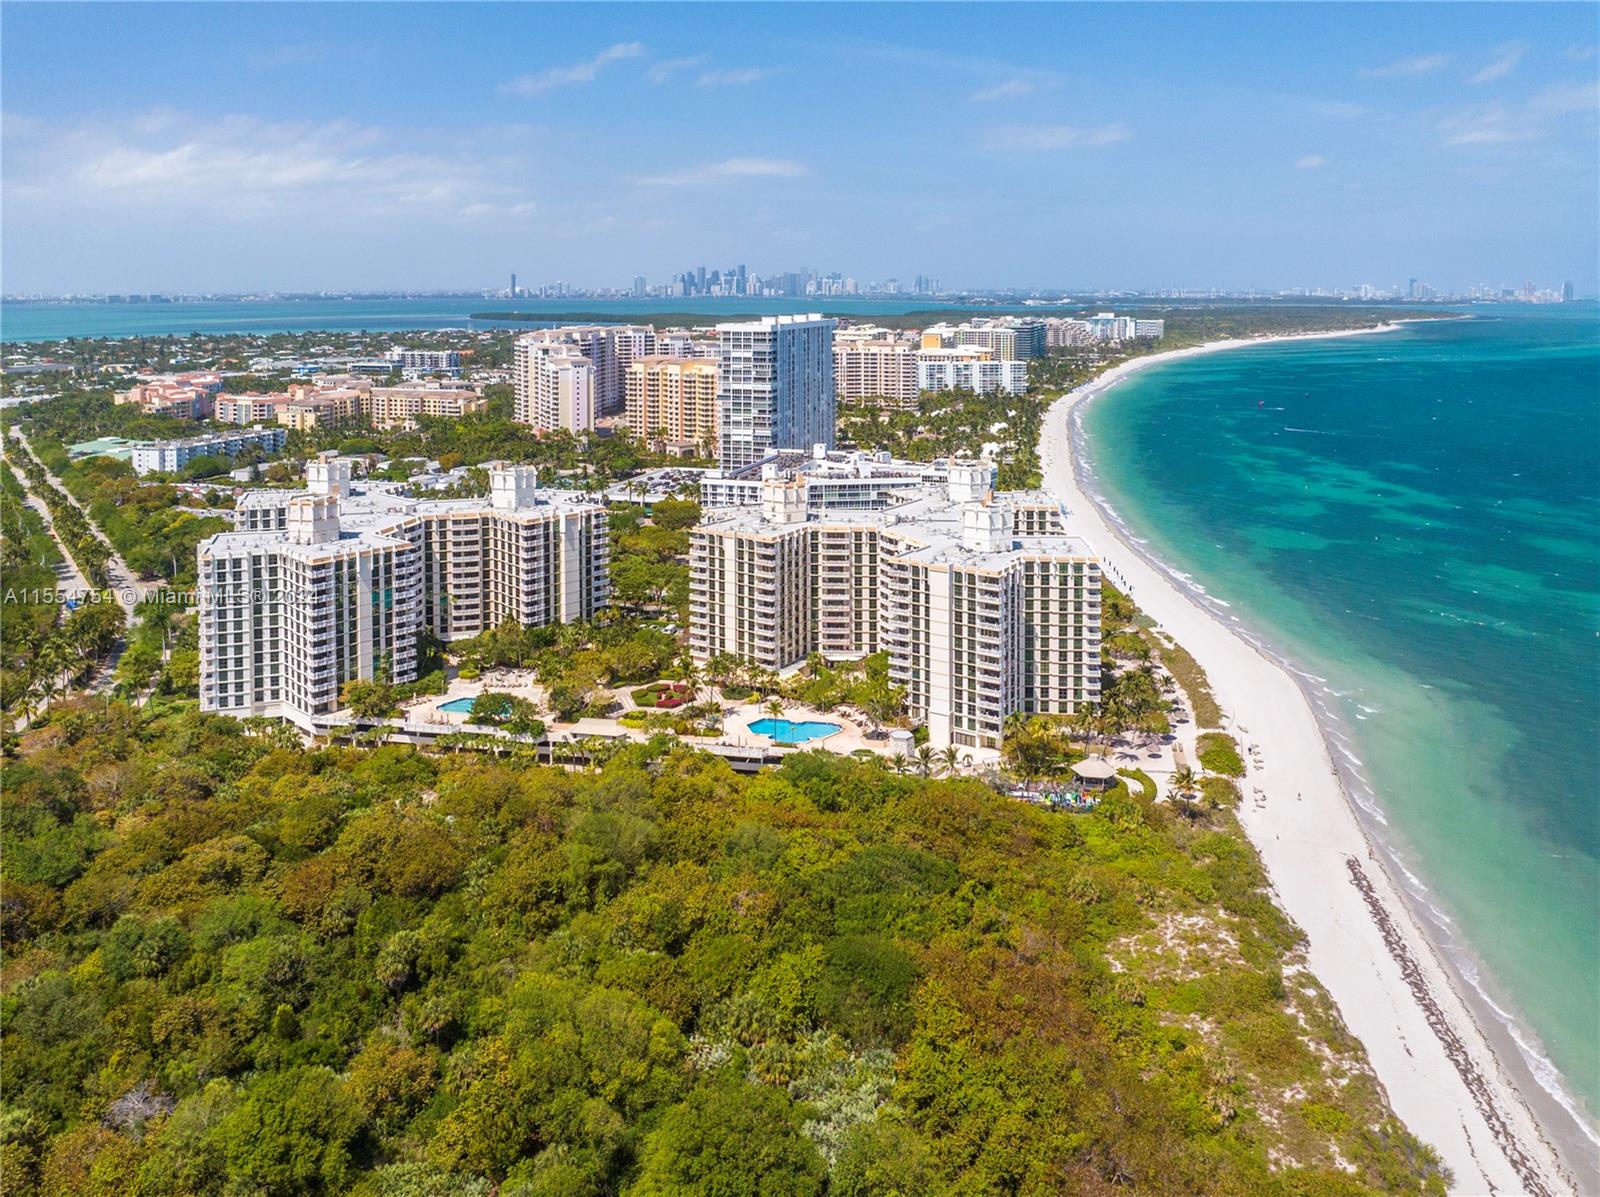 SPACIOUS 2 BED, 2 BATH UNIT AT THE TOWERS OF KEY BISCAYNE. INTERIOR FEATURES INCLUDE: 1,409 SF, EAT IN KITCHEN, LAUNDRY ROOM, AMPLE CLOSET SPACE, PRIVATE BALCONY, IMPACT WINDOWS, PARQUET WOOD FLOORS, 1 PARKING SPACE. 
COME ENJOY ALL THE WONDERFUL AMENITIES OF THE BUILDING SUCH AS 2 POOLS, BEACH ACCESS, BBQ, GAZEBO, FISH POND, ON-SITE RESTAURANT, SALON, CONFERENCE ROOM, GYM, SECURITY AND GUARD ON SITE